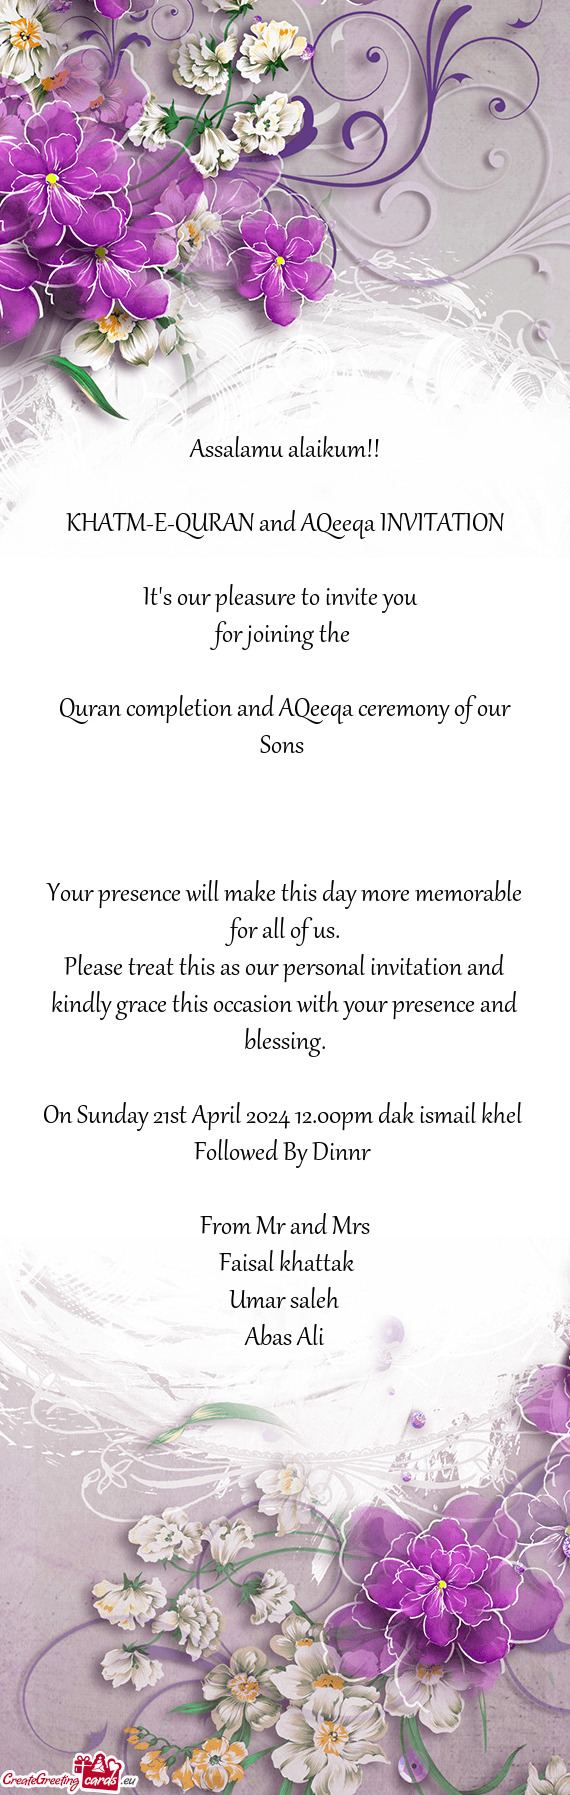 Quran completion and AQeeqa ceremony of our Sons